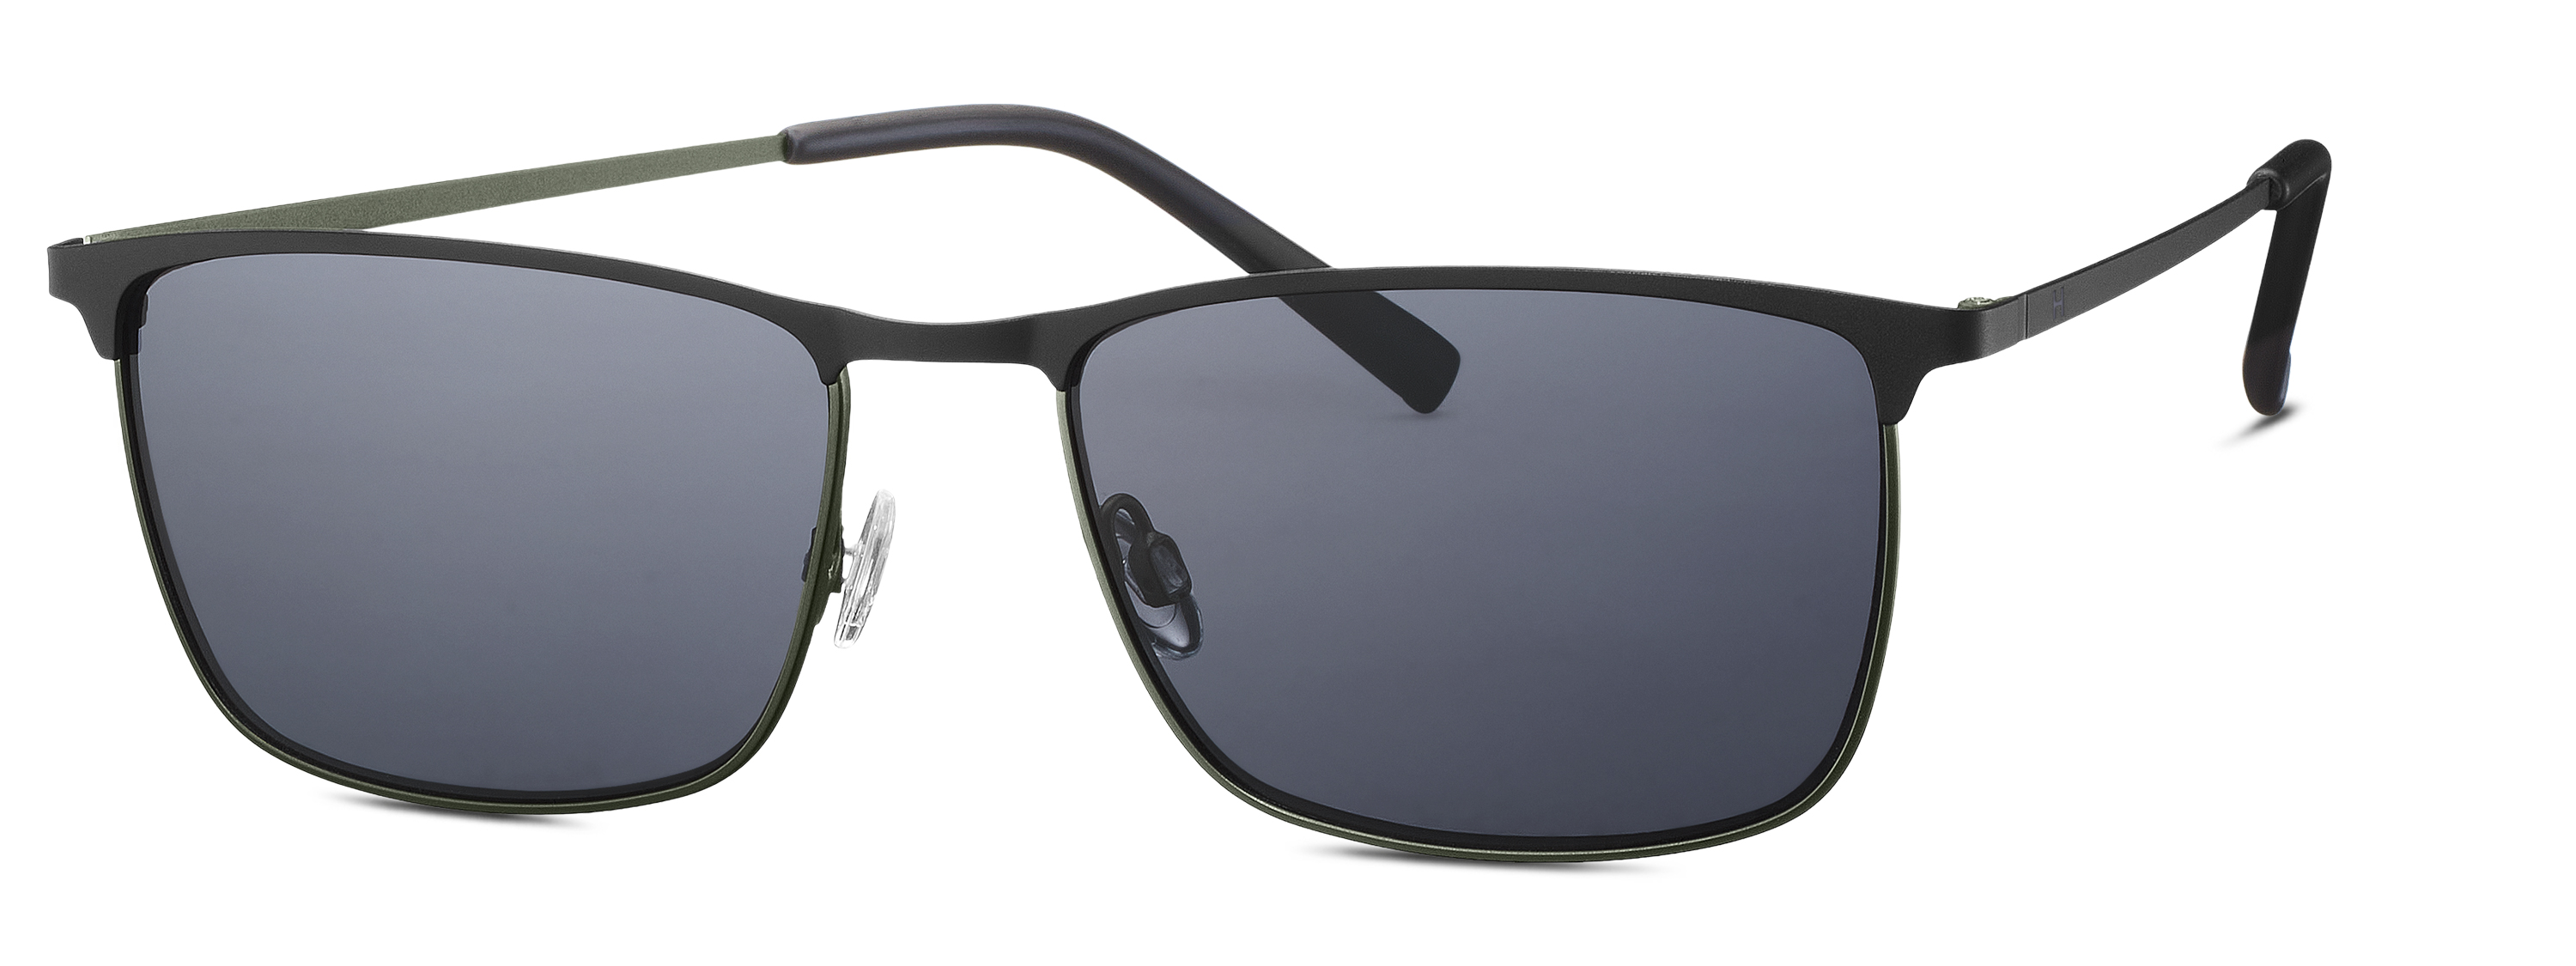 [products.image.front] HUMPHREY´S eyewear 585332 10 Sonnenbrille